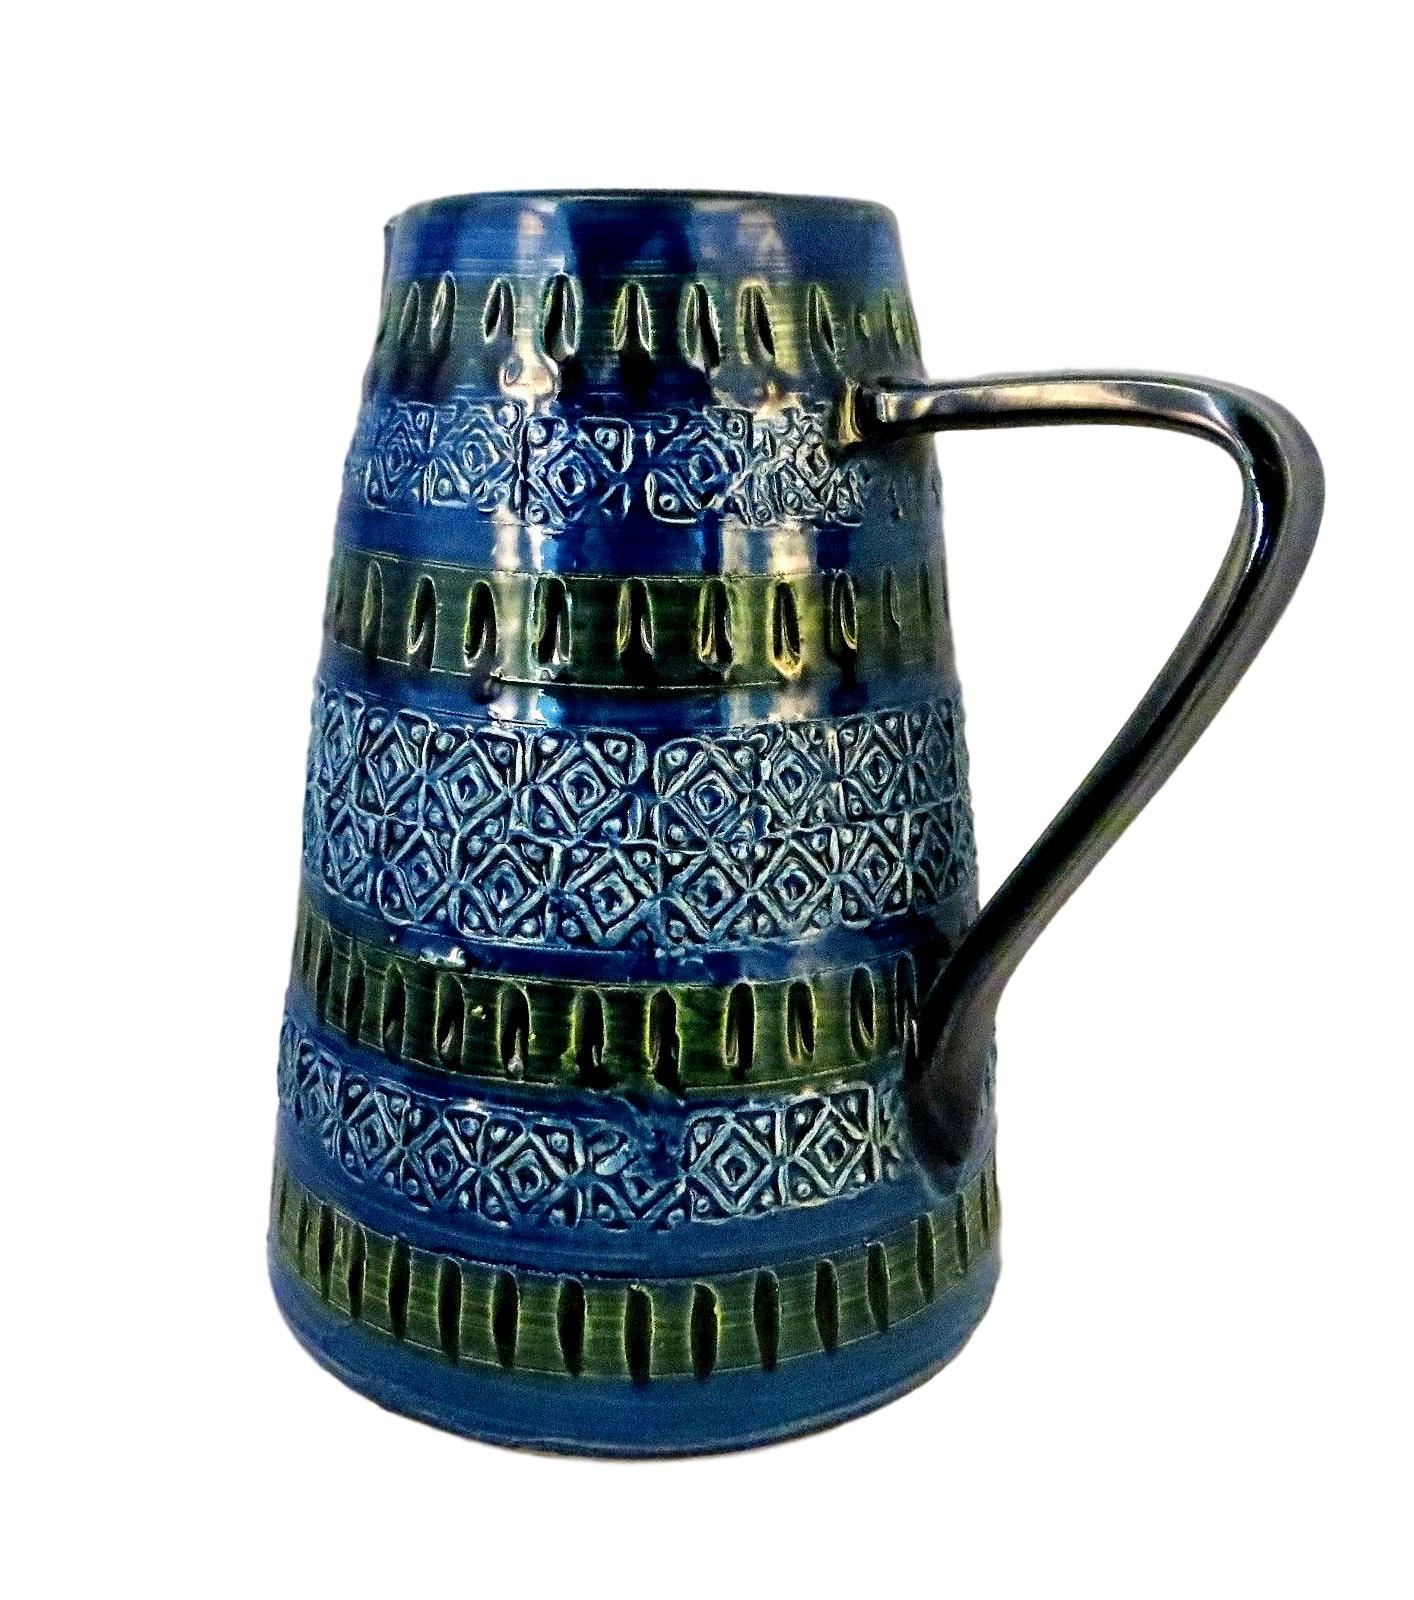 Italian Ceramic Pitcher and 4 Tumblers by Bitossi